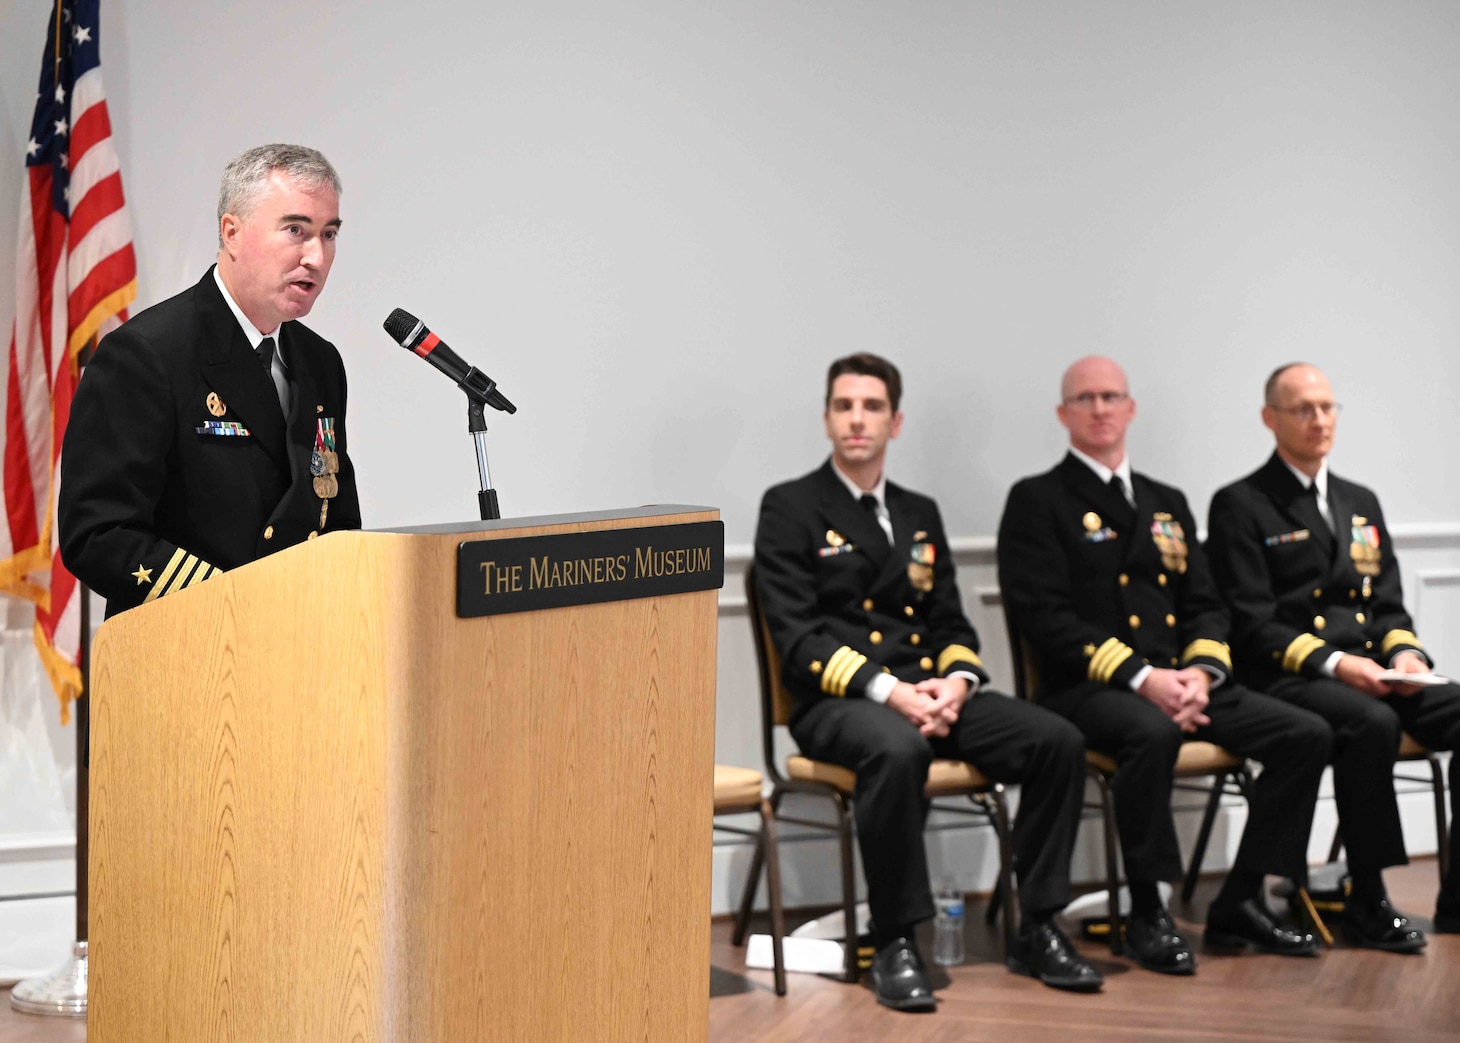 Capt. Brian Hogan, commodore, Submarine Squadron Eight, speaks as the presiding officer during a change of command ceremony for the Los Angeles-class fast-attack submarine USS Columbus (SSN 762) at the Mariner’s Museum and Park in Newport News, Virginia.